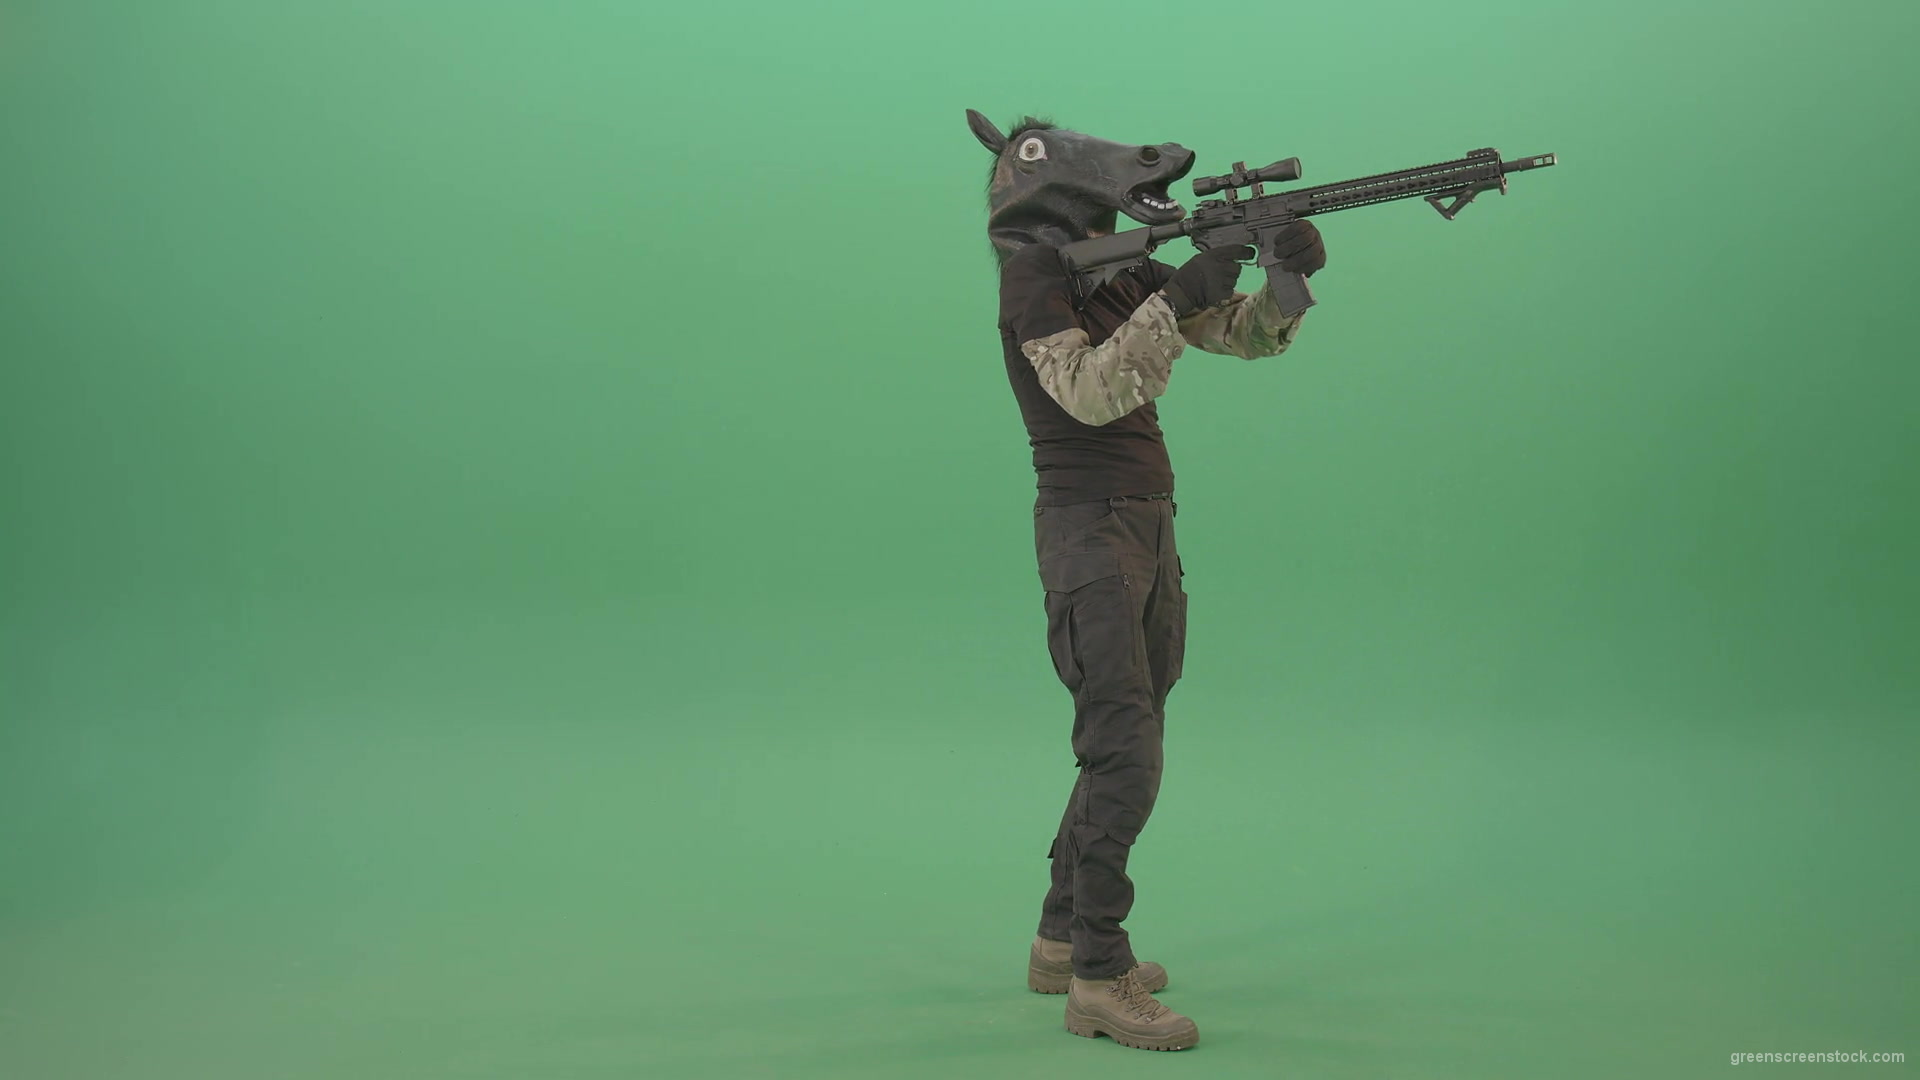 Funny-Army-Horse-Man-shooting-animals-on-Green-Screen-from-Machine-Gun-4K-Video-Footage-1920_009 Green Screen Stock